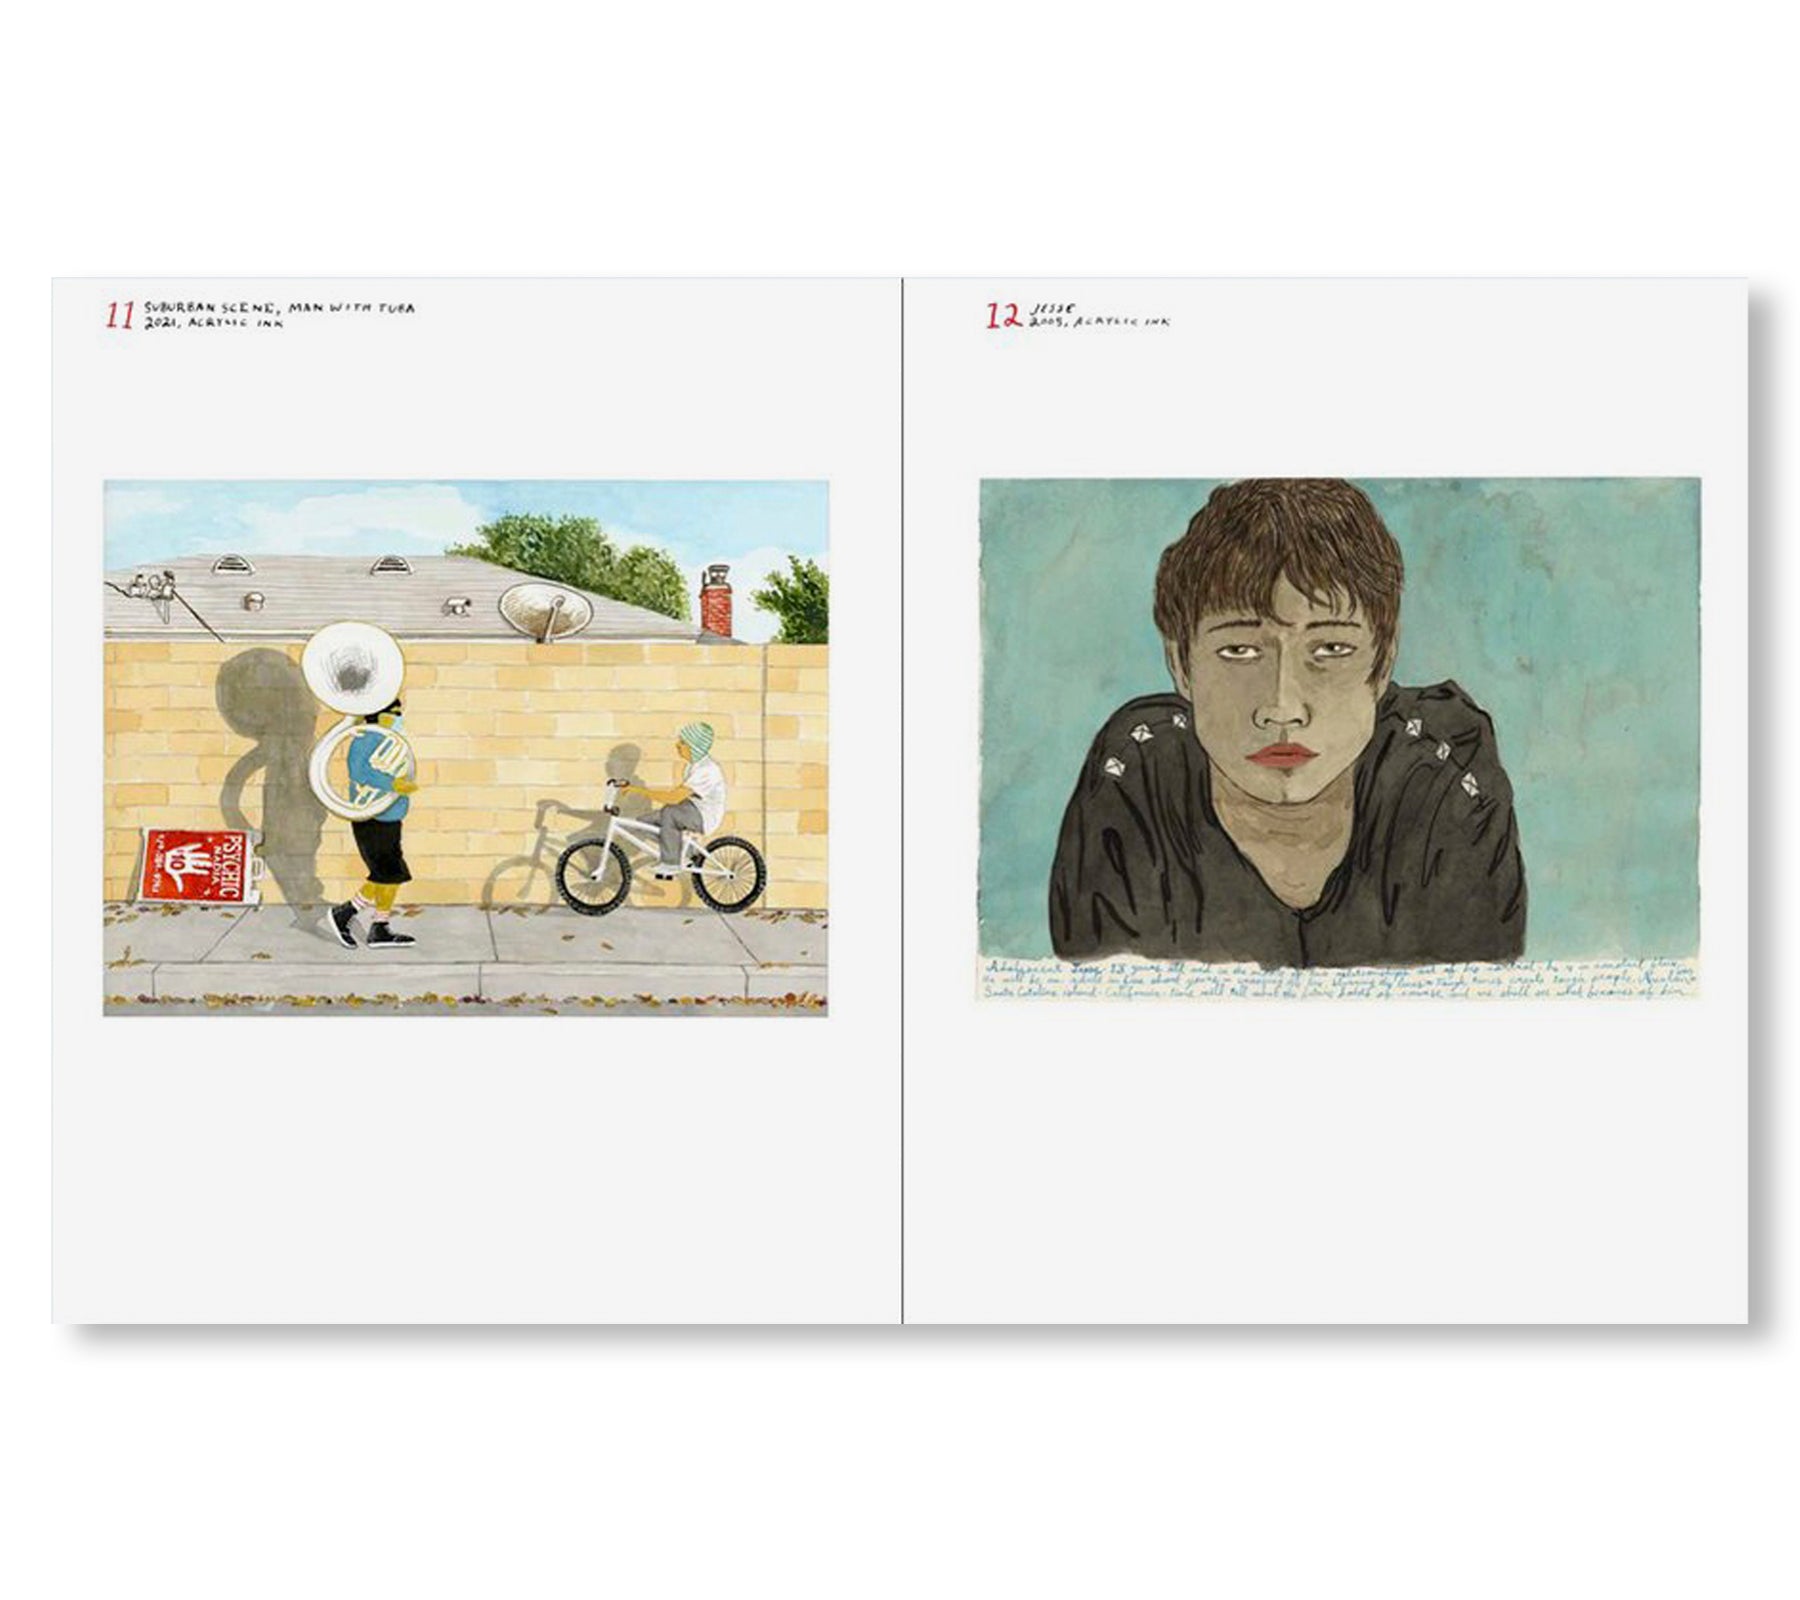 87 DRAWINGS by Ed Templeton [DELUXE EDITION]